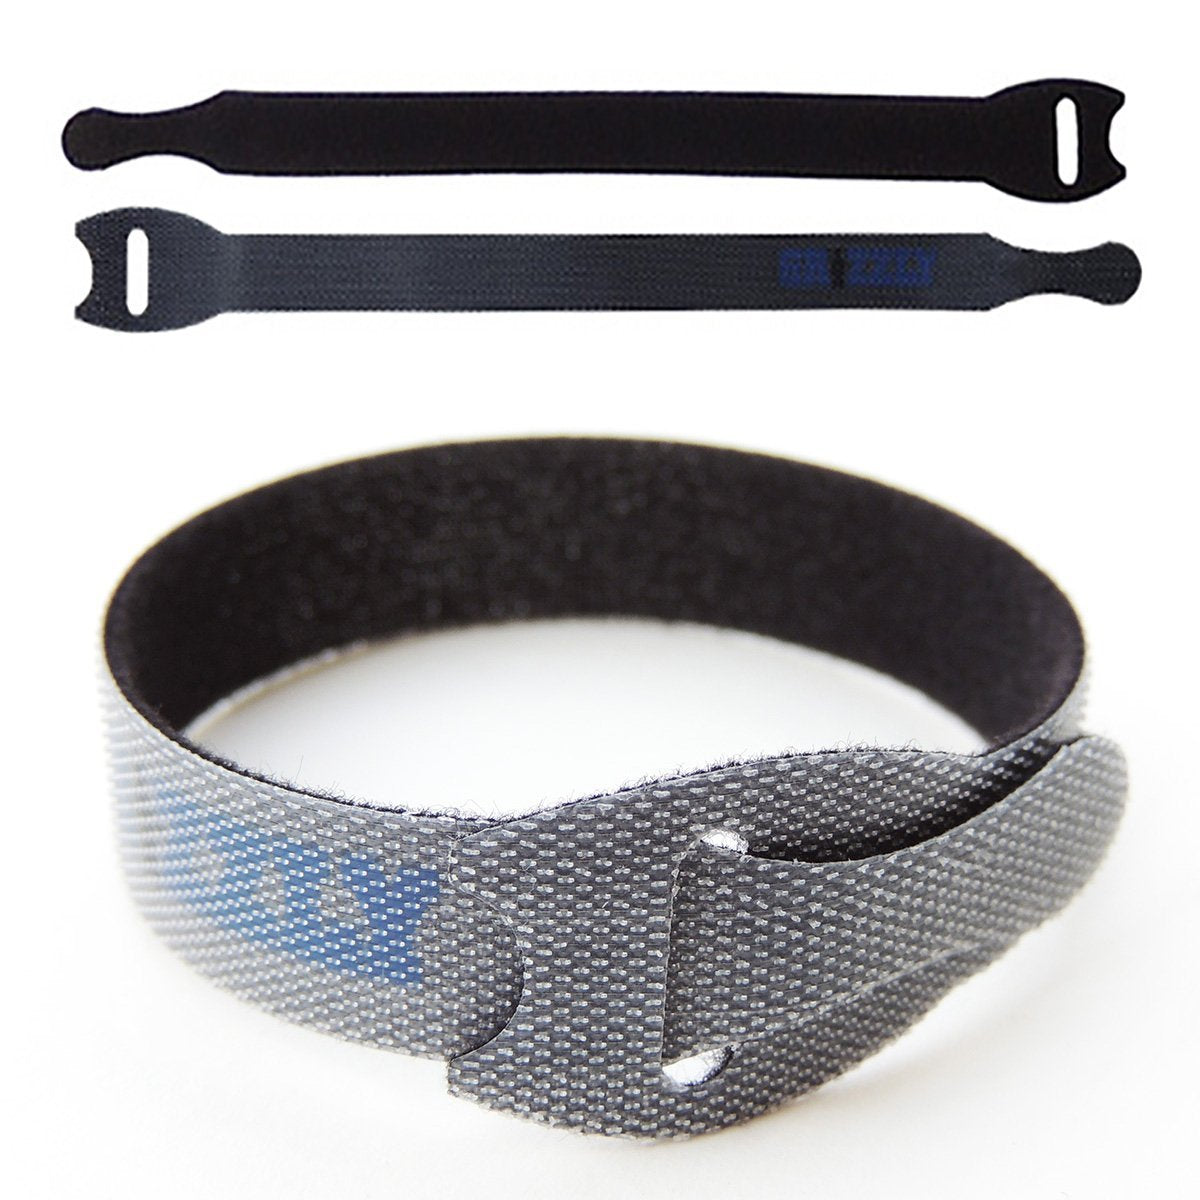 Cinch Straps, Reusable Black Nylon Cable/Securing Straps, 1 inch Wide, –